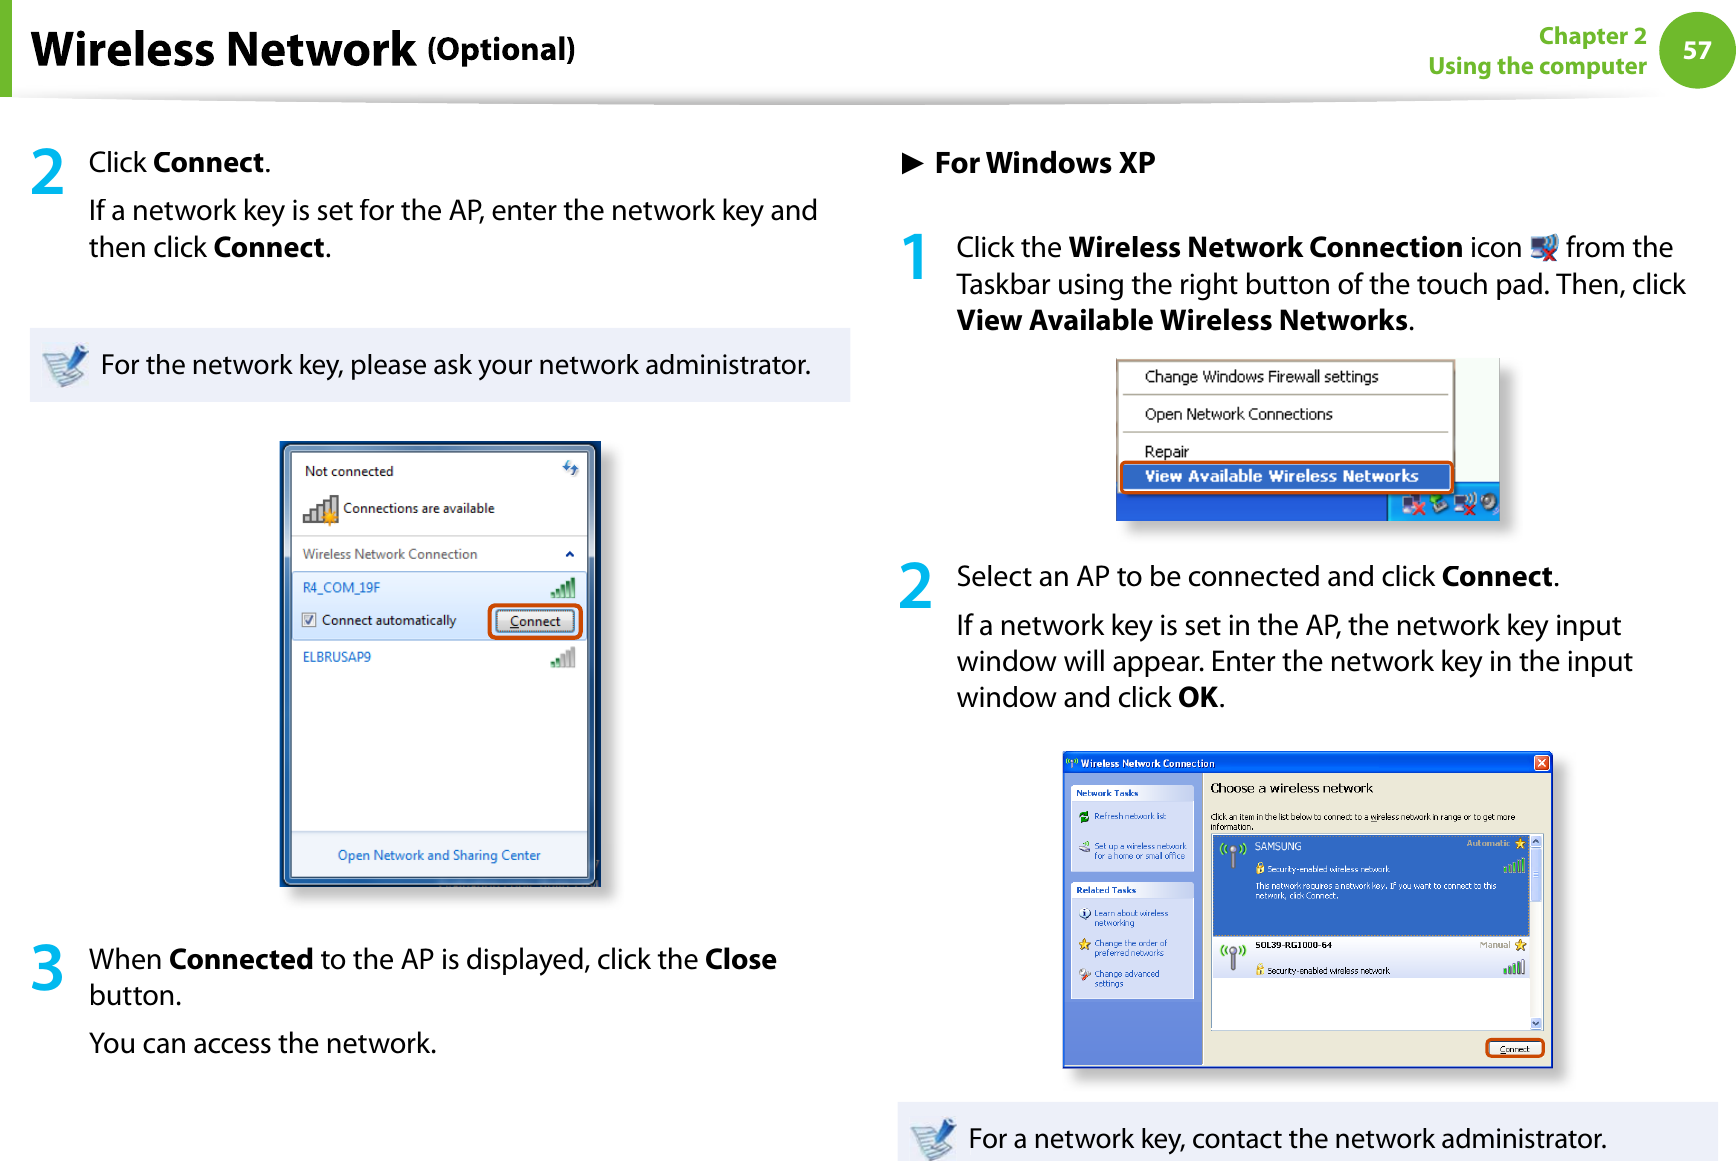 57Chapter 2Using the computer2Click Connect.If a network key is set for the AP, enter the network key andthen click Connect.For the network key, please ask your network administrator.3When Connected to the AP is displayed, click theClosebutton.You can access the network.Ź For Windows XP1Click theWireless Network Connection icon  from theTaskbar using the right button of the touch pad. Then, click View Available Wireless Networks.2Select an AP to be connected and click Connect.If a network key is set in the AP, the network key inputwindow will appear. Enter the network key in the inputwindow and click OK.For a network key, contact the network administrator.